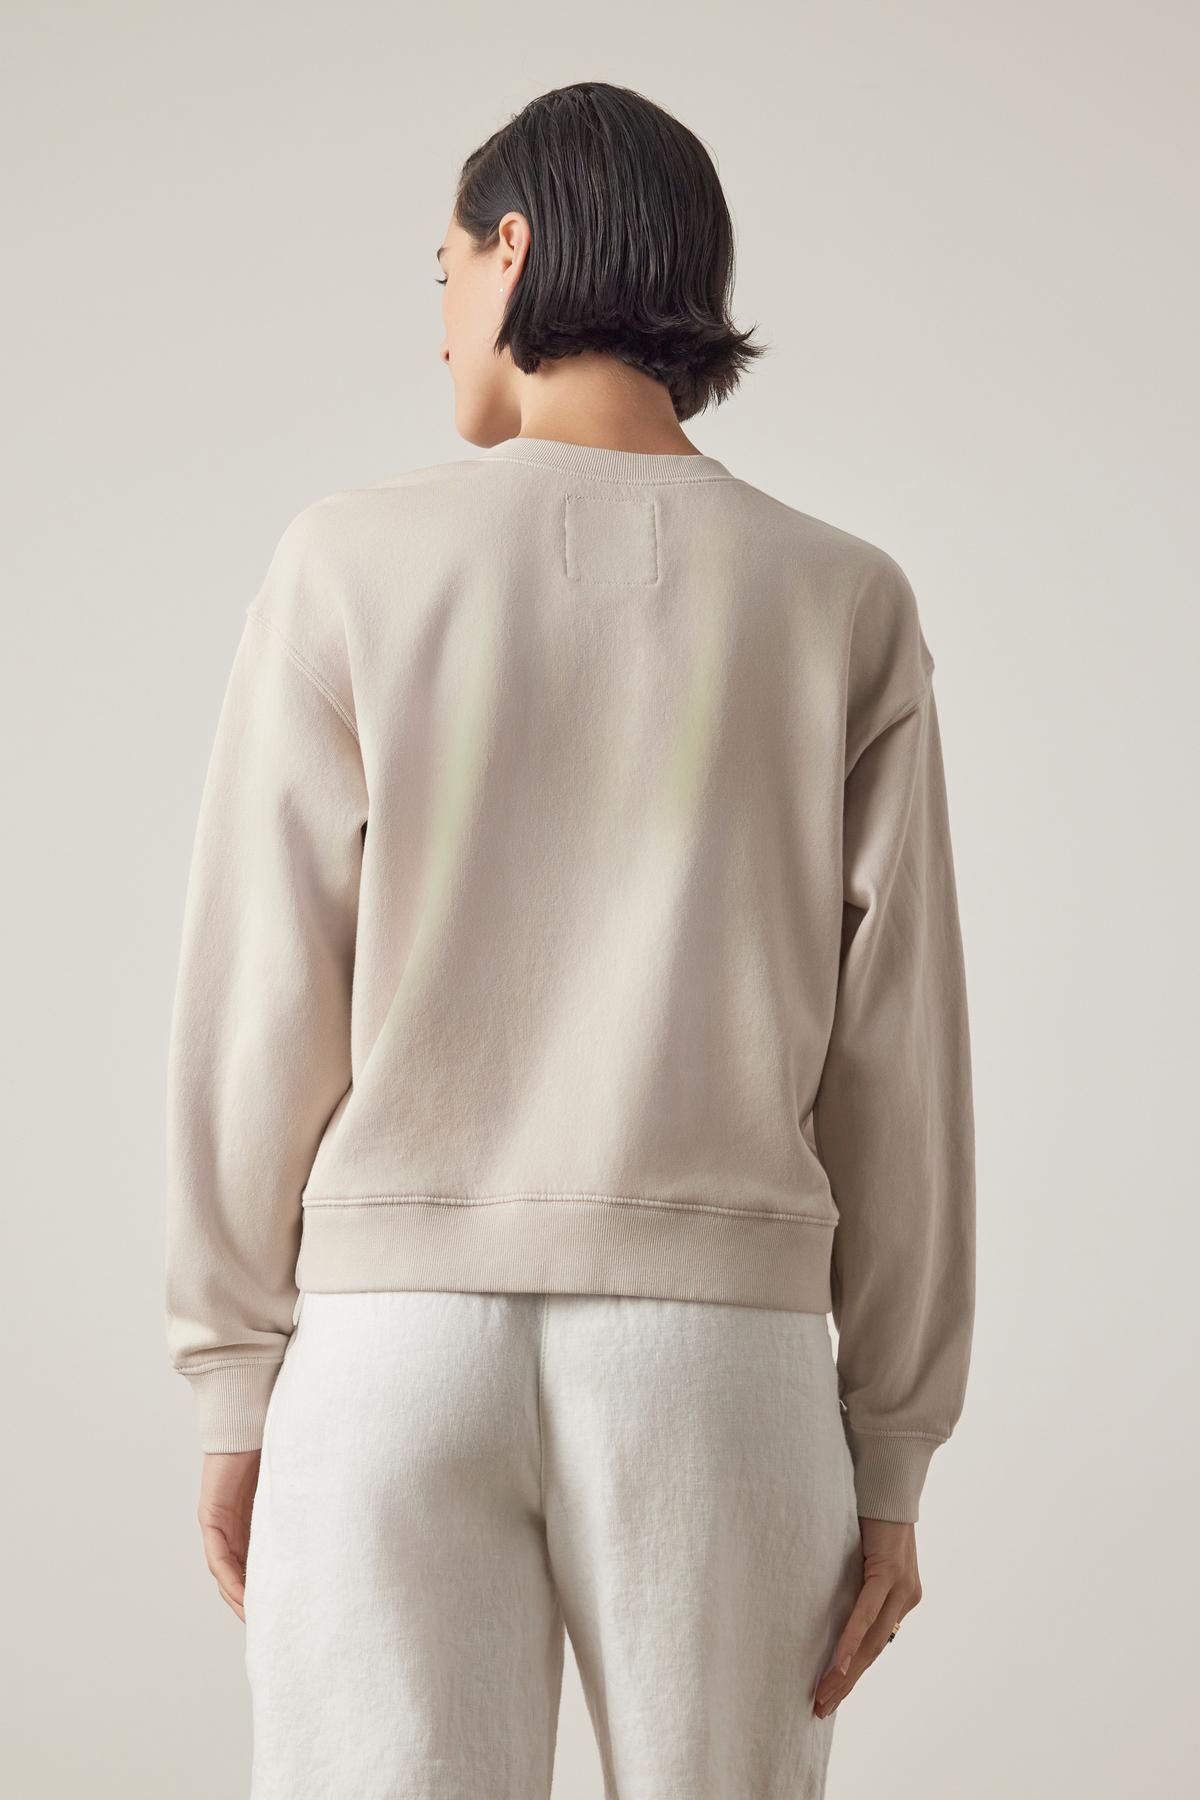 Woman from behind wearing a beige organic YNEZ Sweatshirt by Velvet by Jenny Graham and white pants against a neutral background.-36863307710657